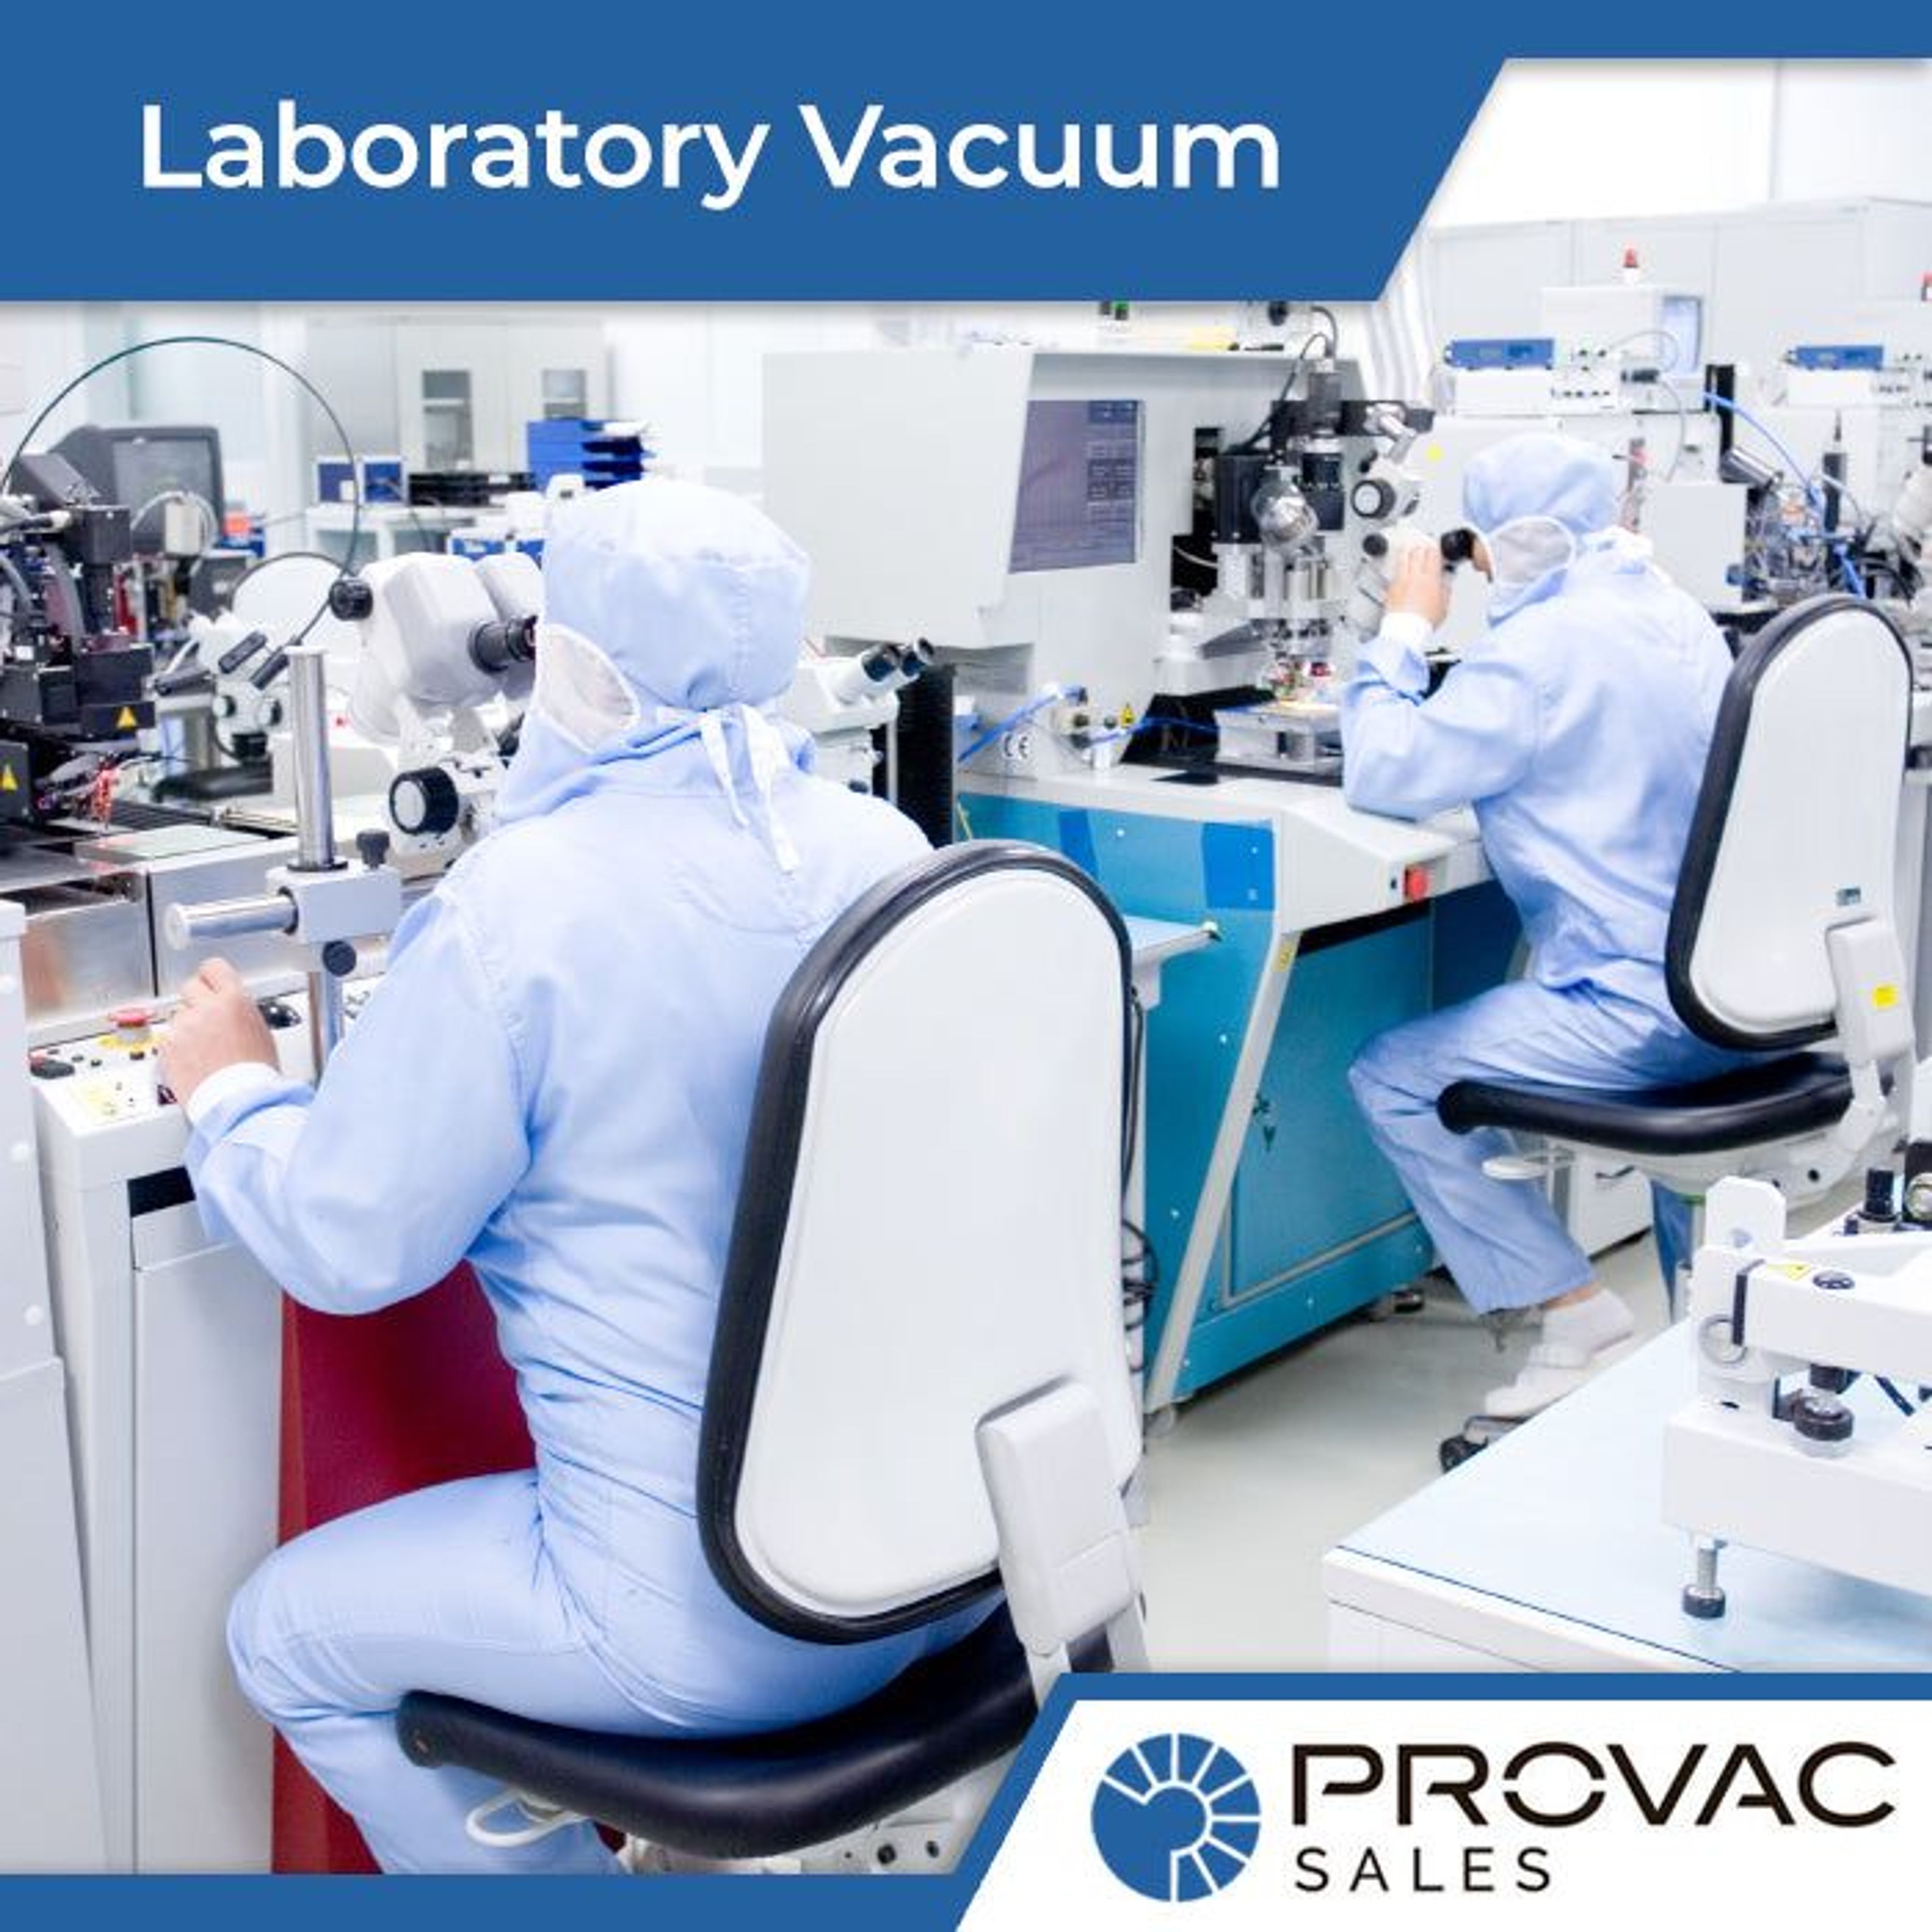 Use of Vacuum Pumps in a Laboratory Background